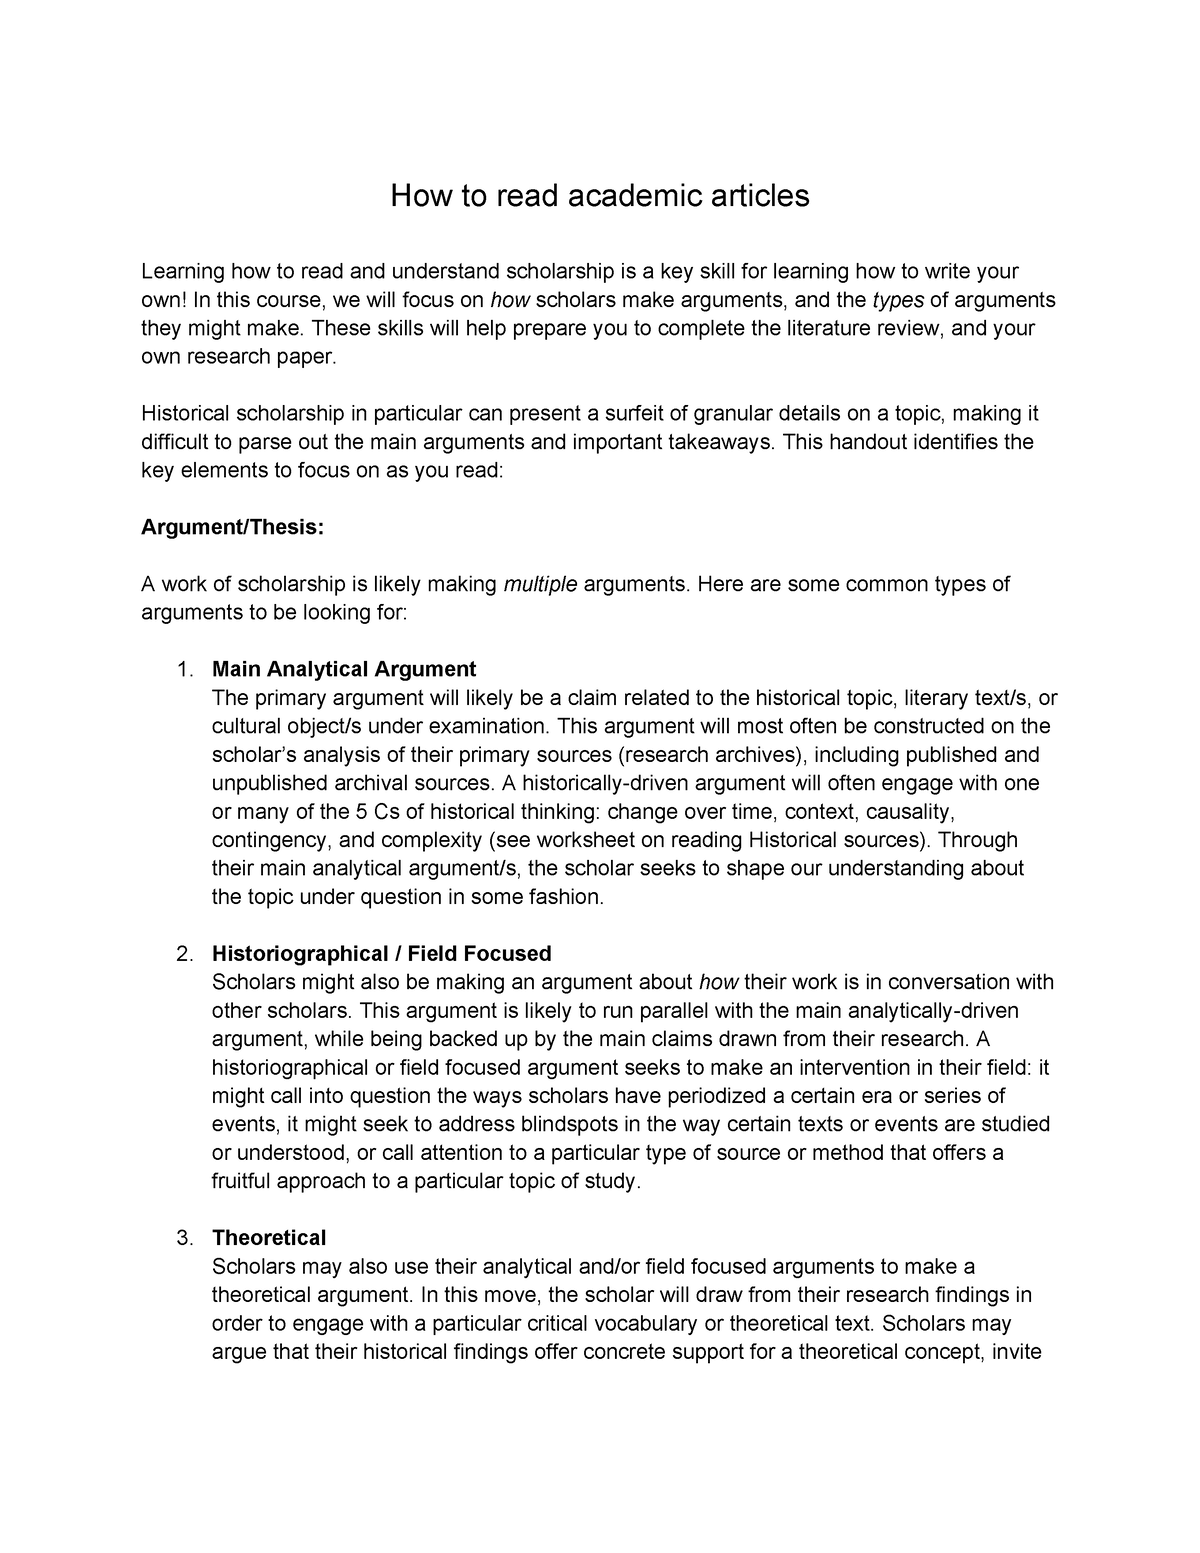 How to Read Academic Articles - How to read academic articles Learning ...